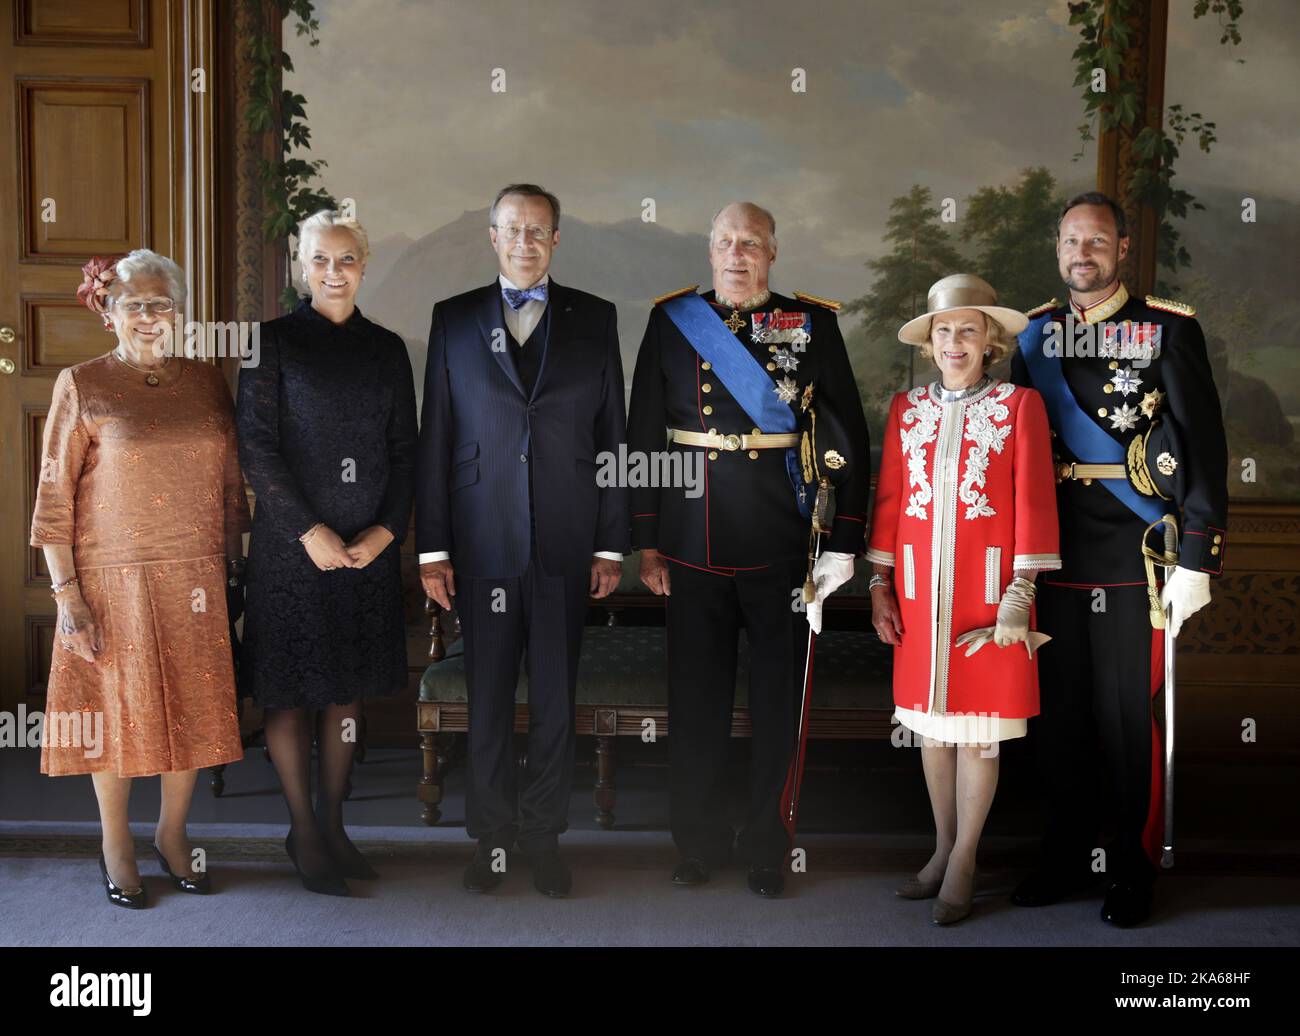 OSLO 20140902. Estonian president Toomas Hendrik Ilves arrived for a one-day state visit to Norway Tuesday September 2, 2014. He was received in the Royal Palace in Oslo. From left: Princess Astrid, Mrs Ferner, Crown Princess Mette-Marit, Estonian President Toomas Hendrik Ilves, King Harald, Queen Sonja and Crown Prince Haakon. Photo: Berit Roald /  Stock Photo